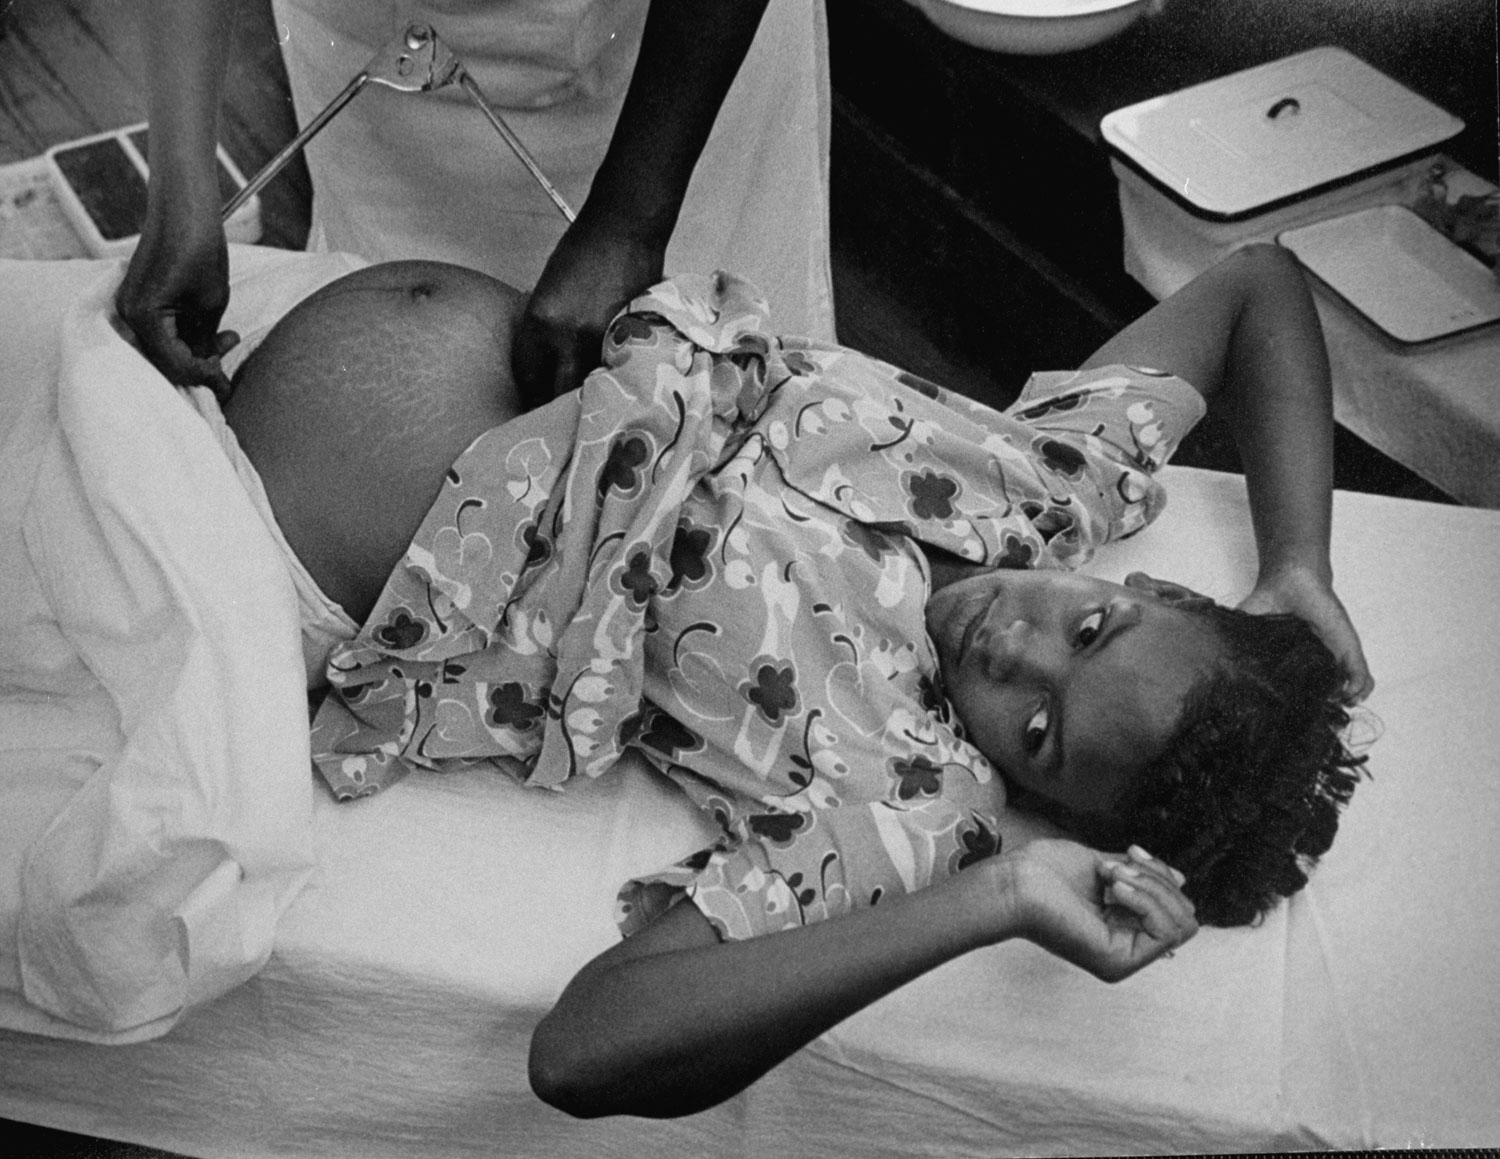 Not published in LIFE. Pregnant woman, South Carolina, 1951.